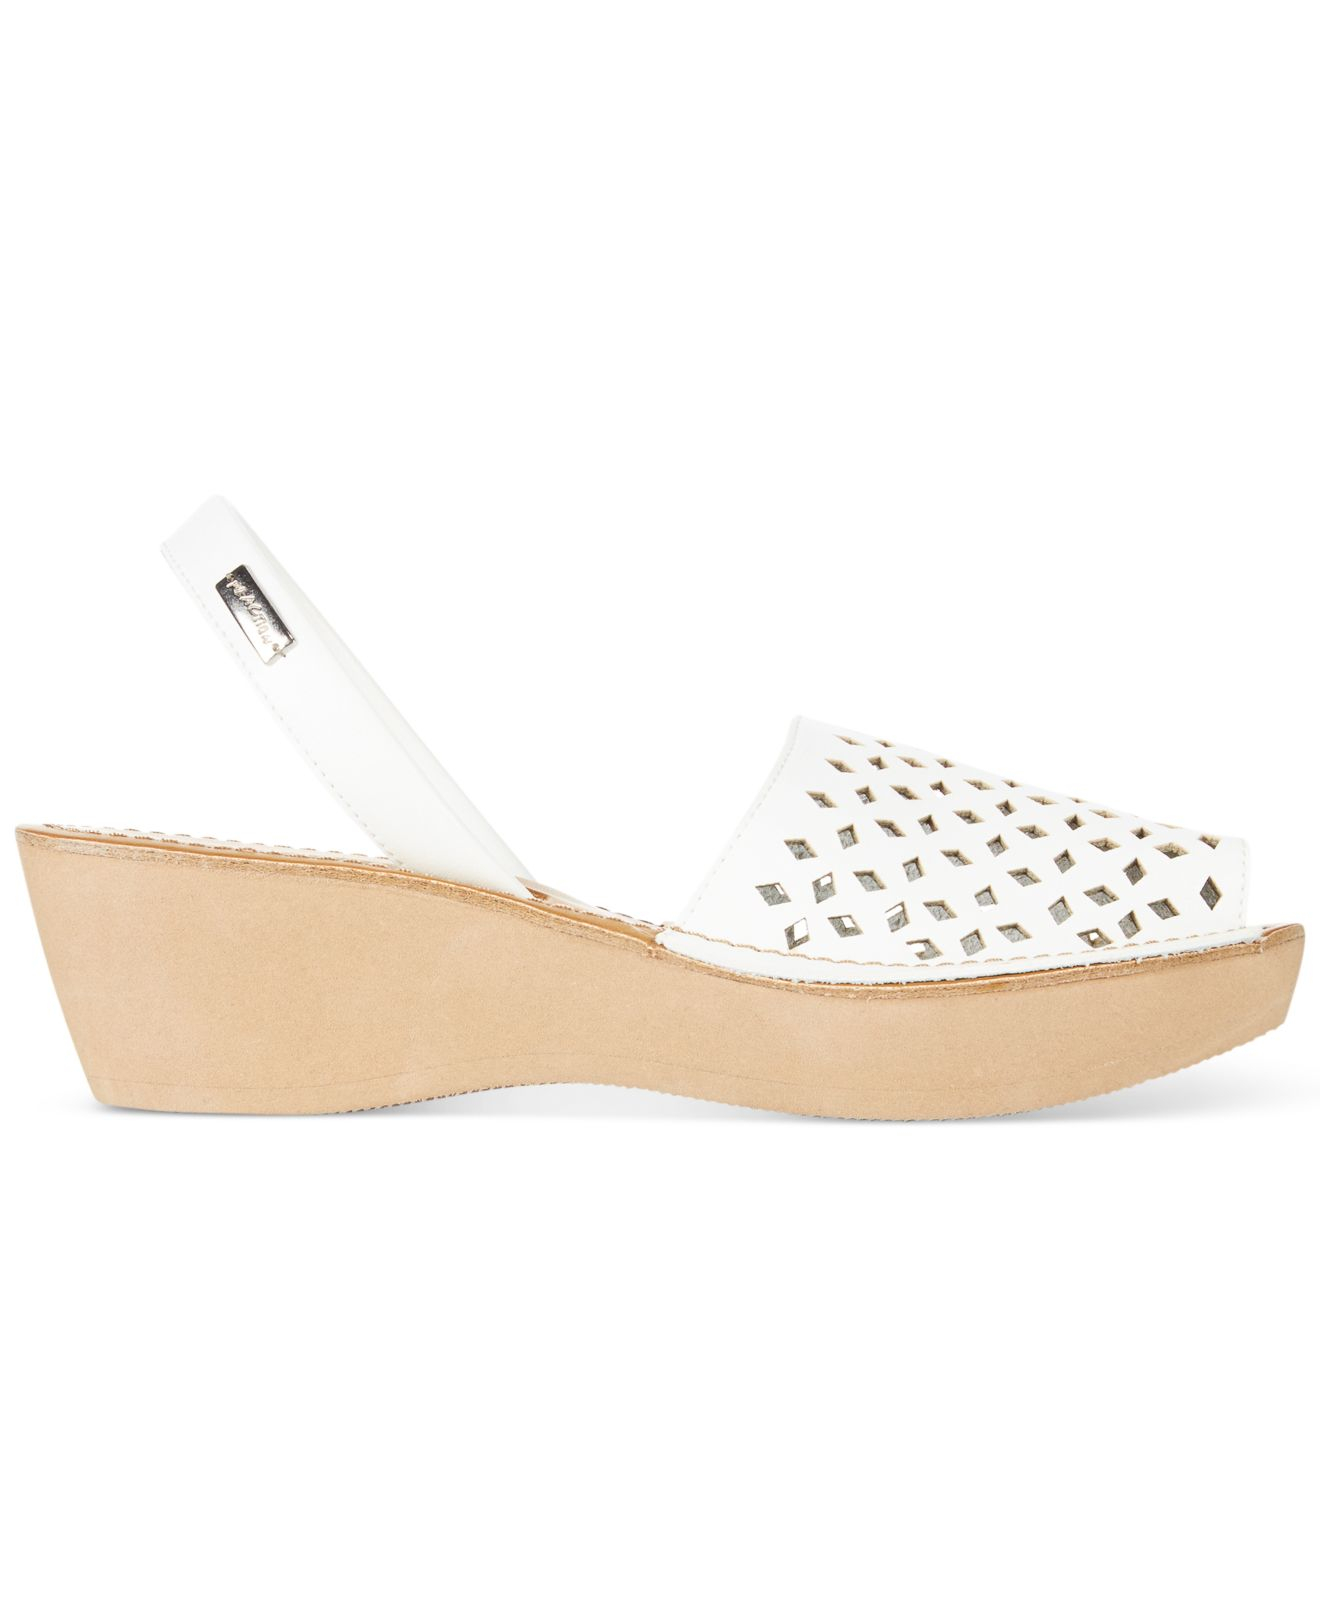 Kenneth Cole Reaction Kenneth Cole Women's Reaction Fine Glass 2 Platform  Wedge Sandals in White | Lyst